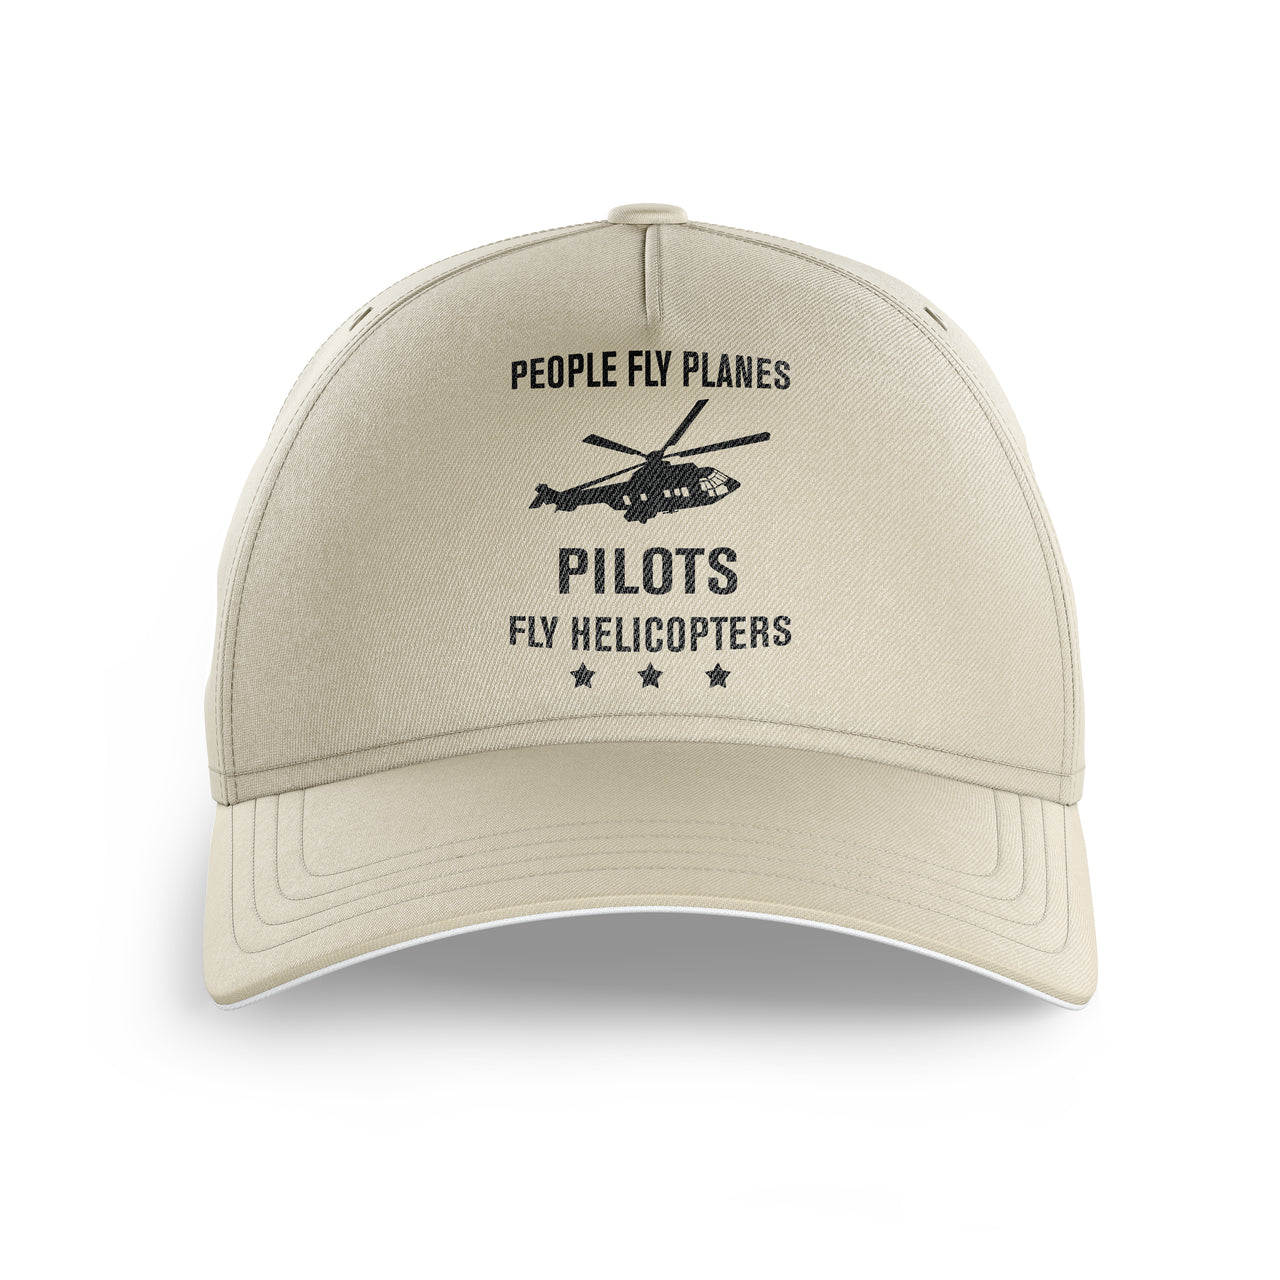 People Fly Planes Pilots Fly Helicopters Printed Hats